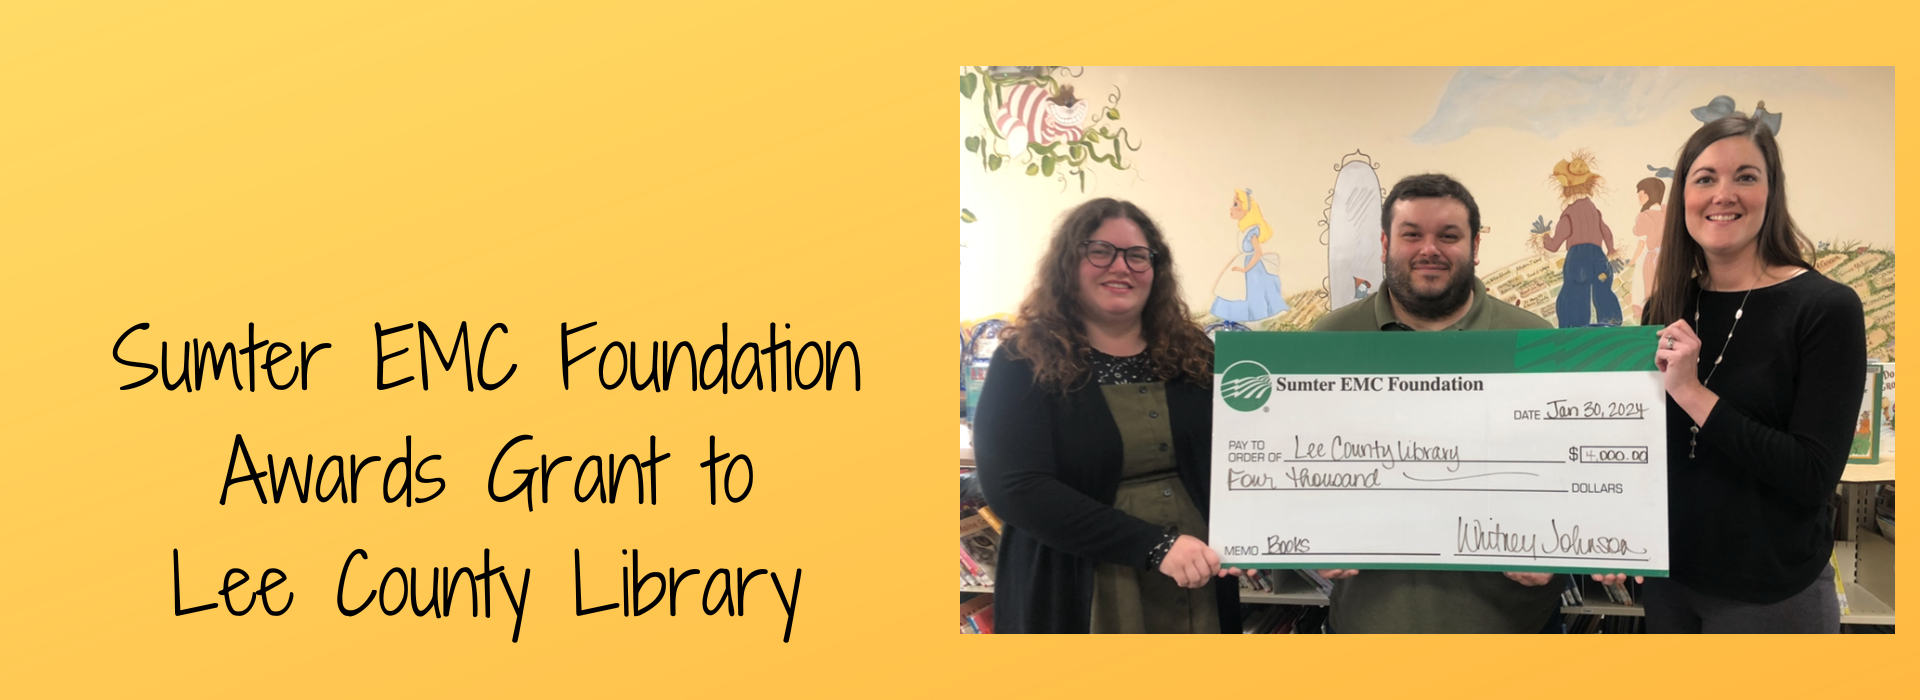 Sumter EMC Foundation Awards Grant to Lee County Library